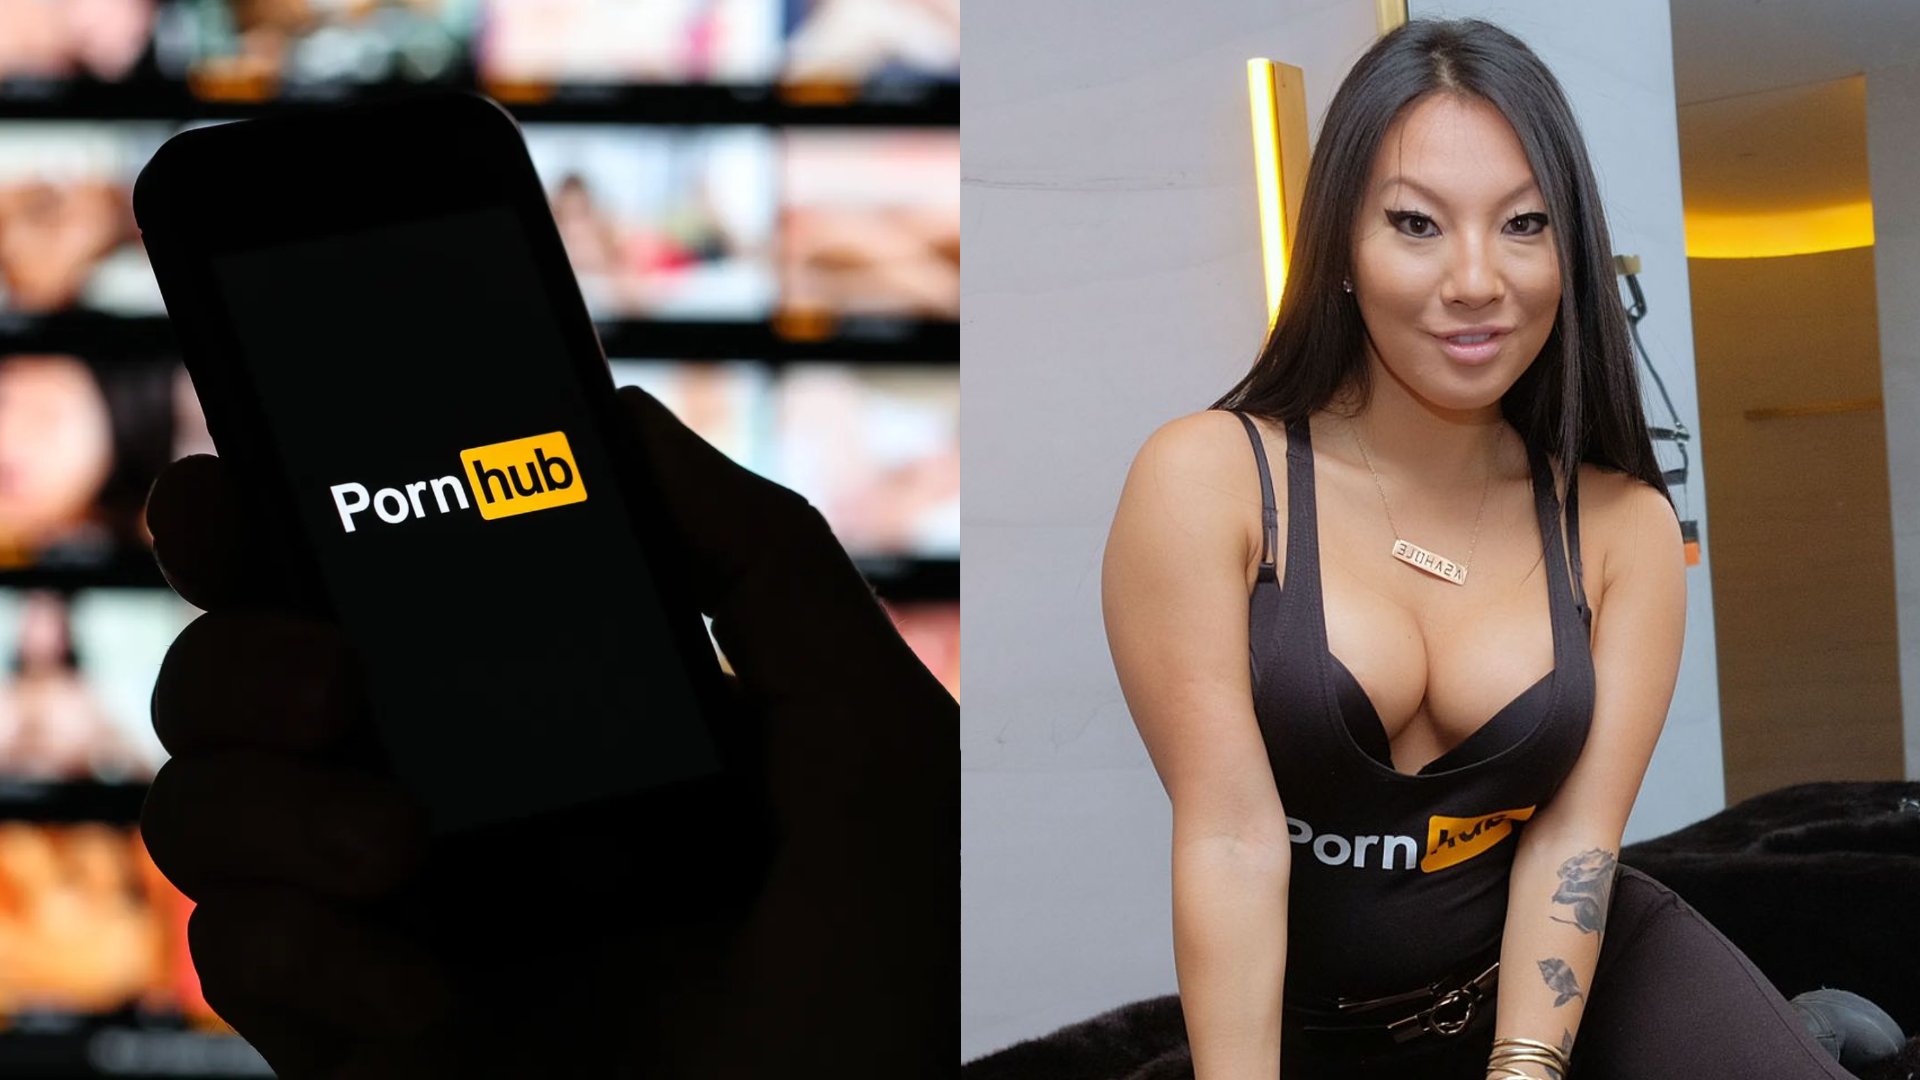 Pornhub bought by Canadian private equity firm